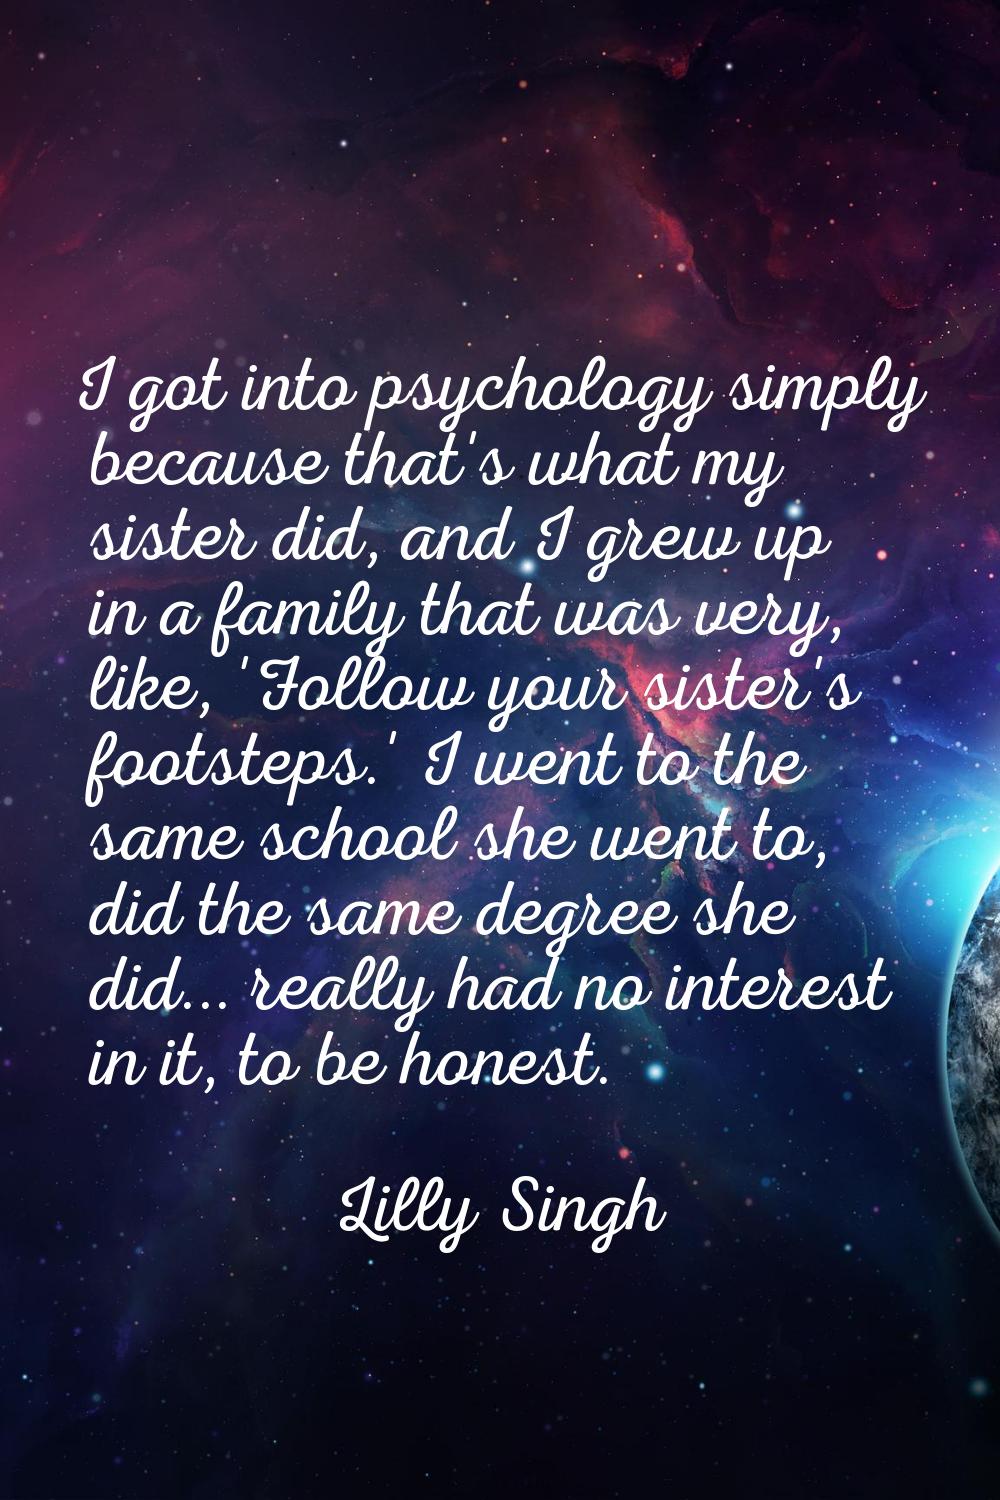 I got into psychology simply because that's what my sister did, and I grew up in a family that was 